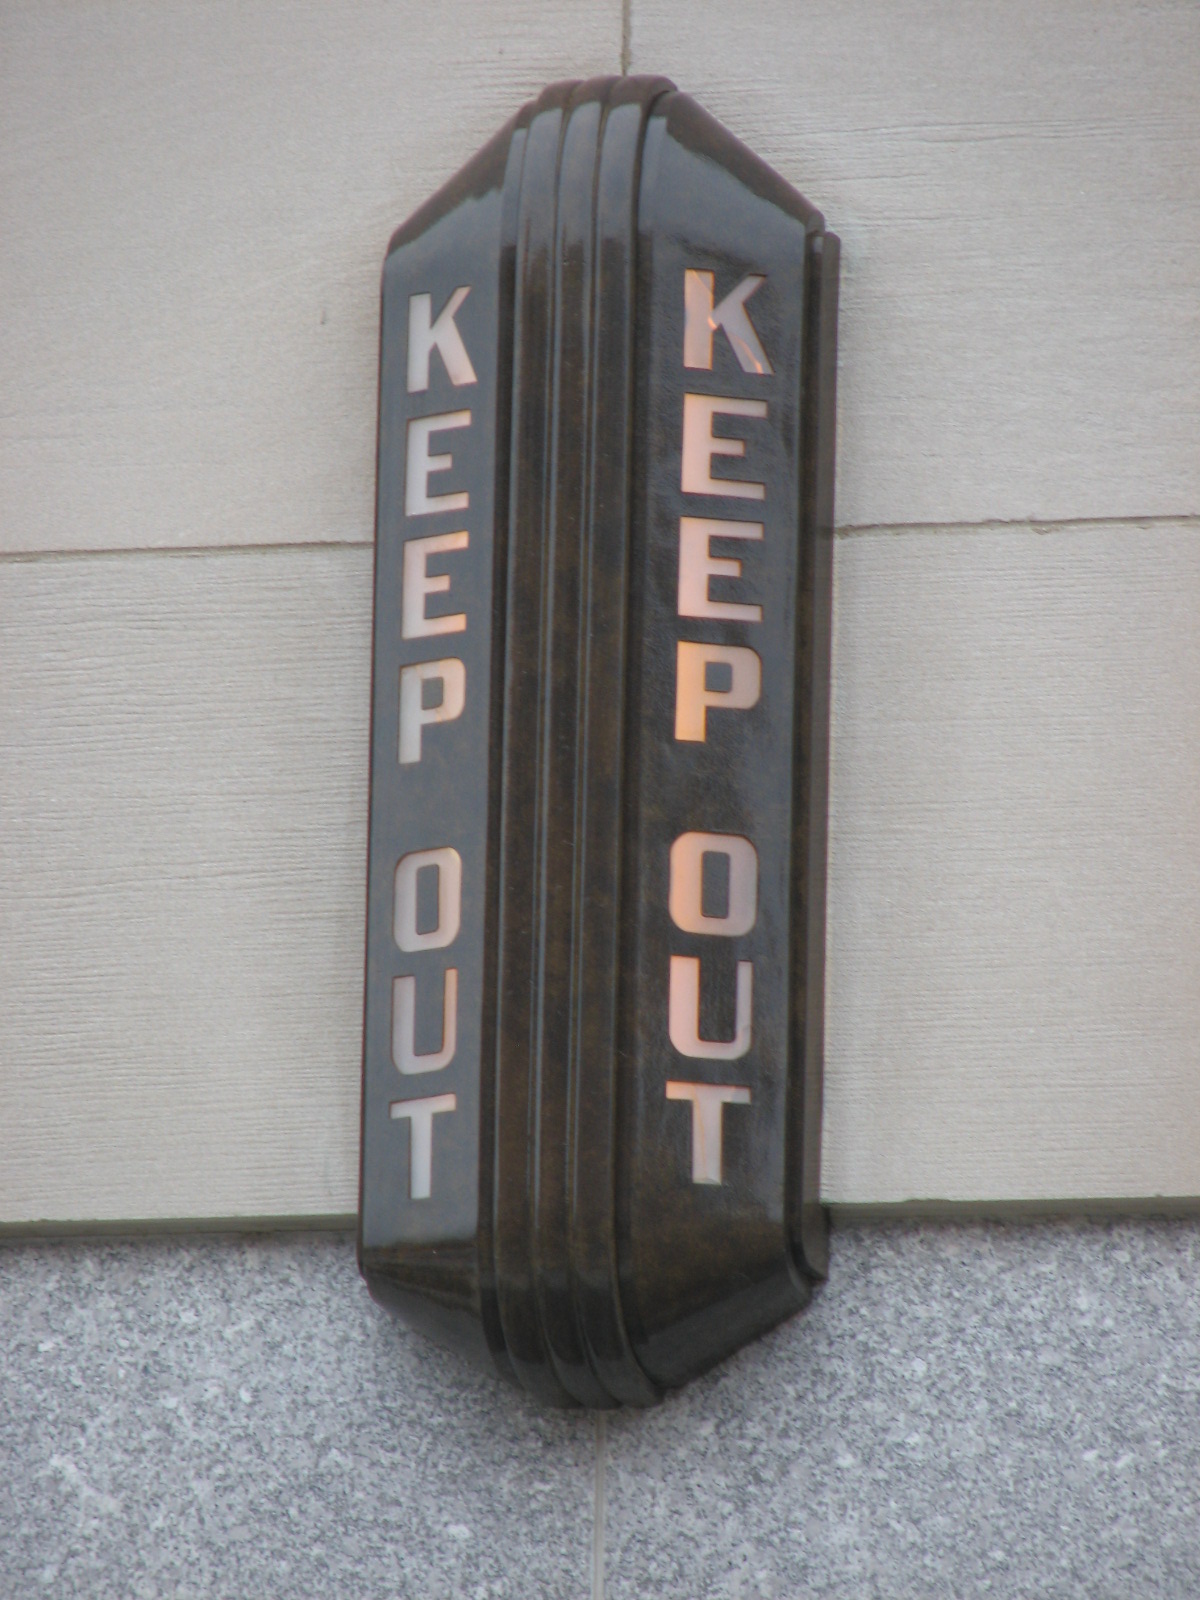 The 1930s Deco signs were also restored on the west side.